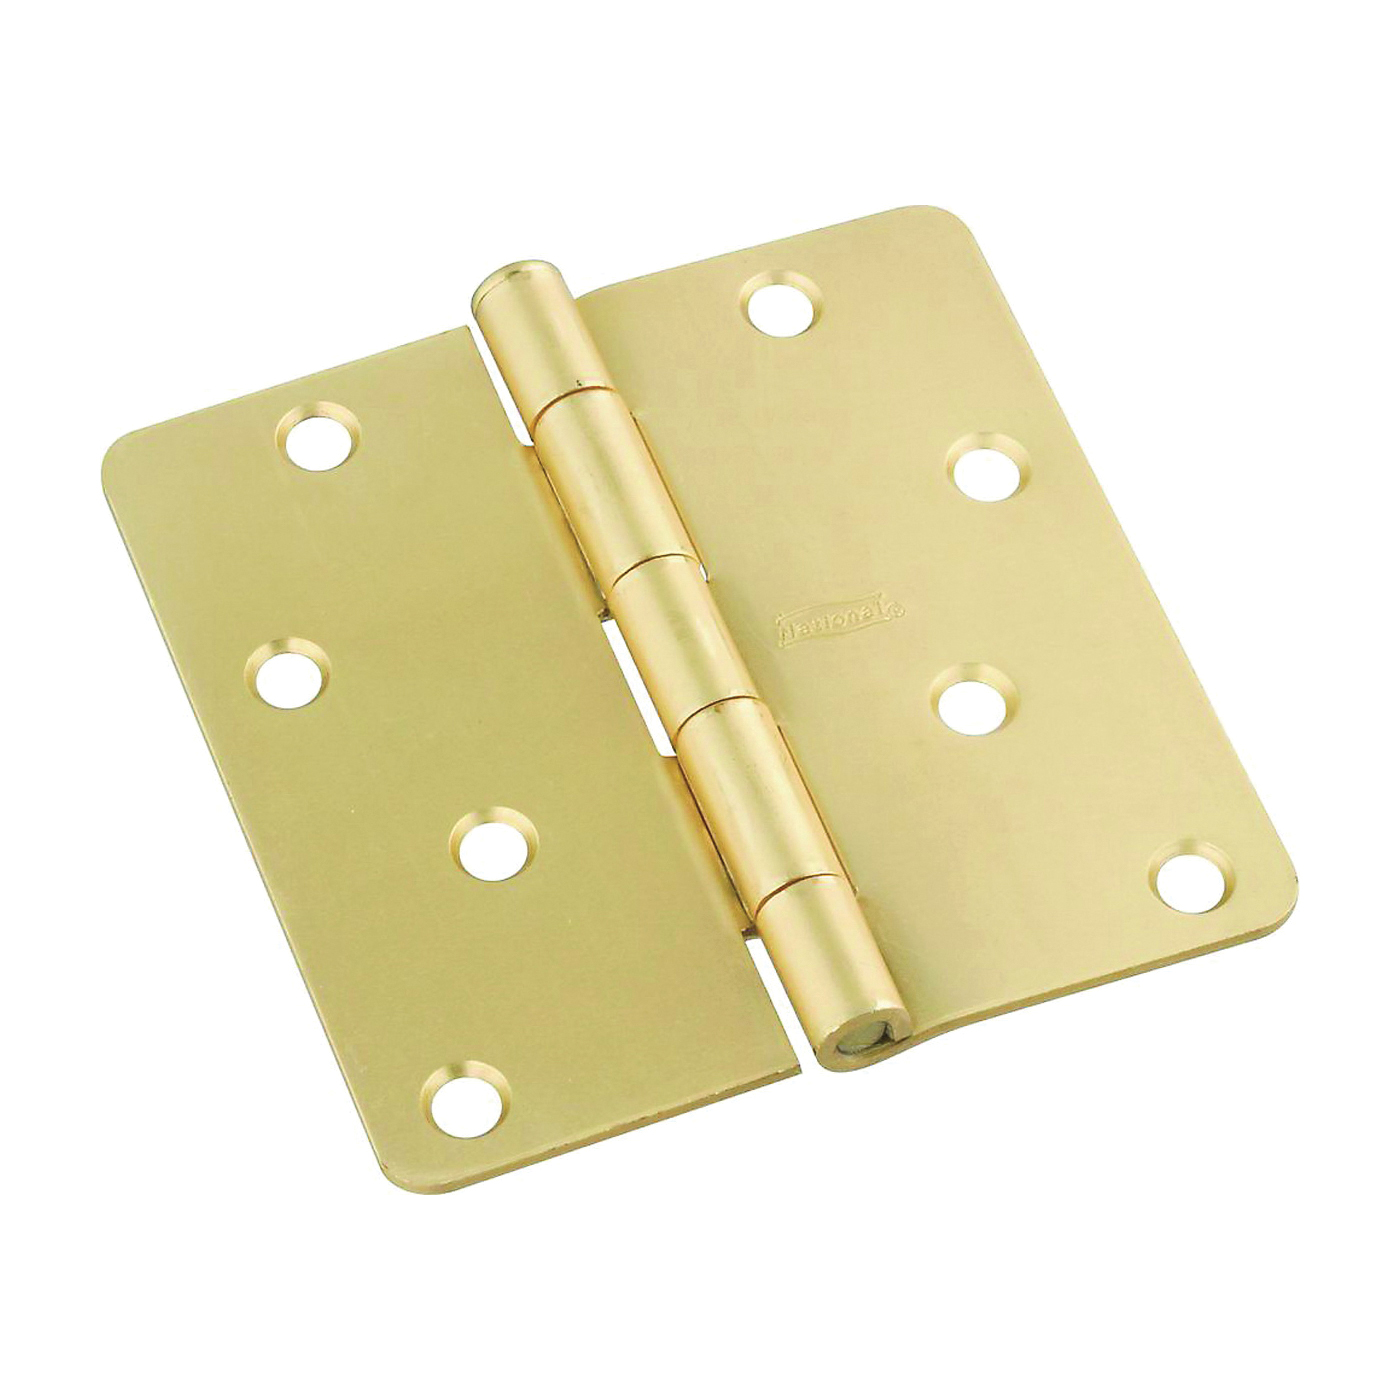 National Hardware N830-229 Door Hinge, Cold Rolled Steel, Satin Brass, Non-Rising, Removable Pin, 50 lb - 1